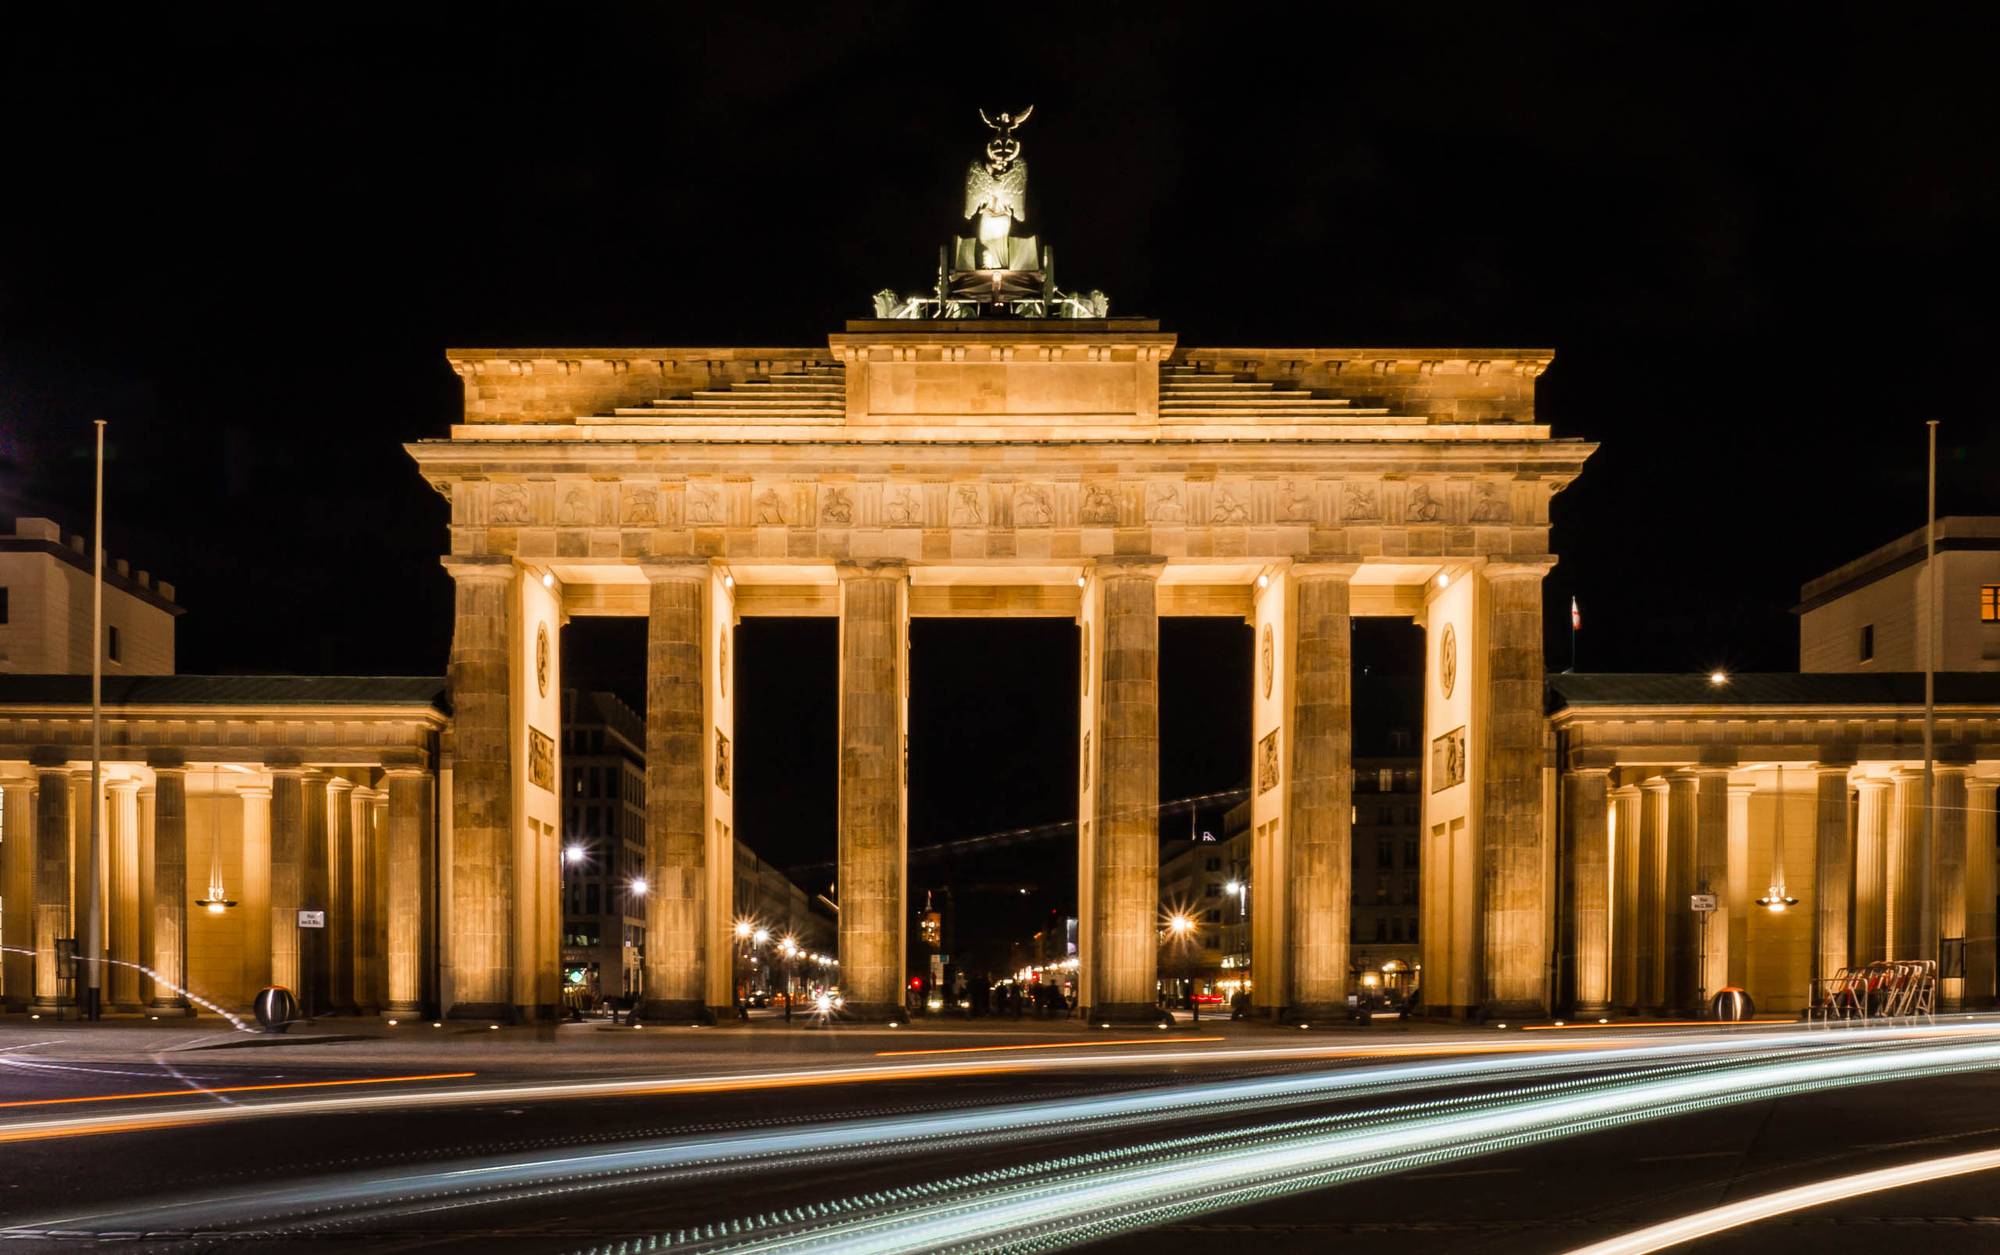 Brandenburg Gate. Photo by julianpetersphotography.de Used with permission